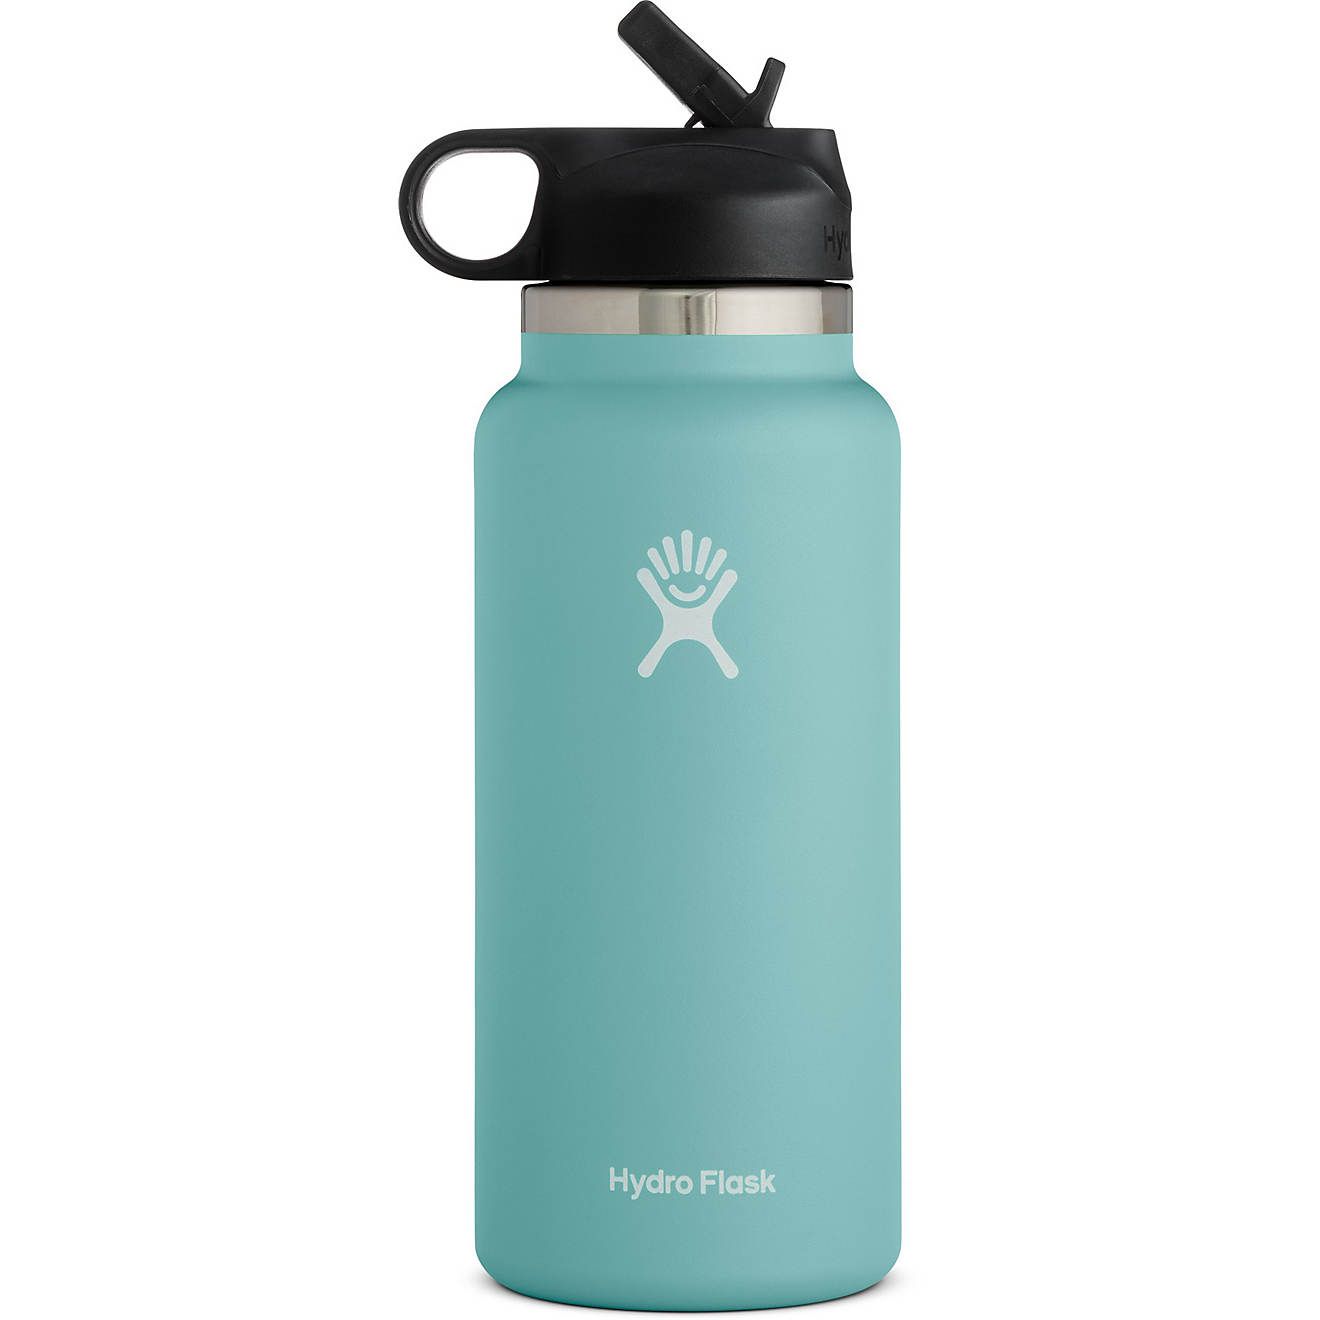 Hydro Flask 32 oz Wide Mouth Bottle 2.0 with Straw Lid | Academy | Academy Sports + Outdoors